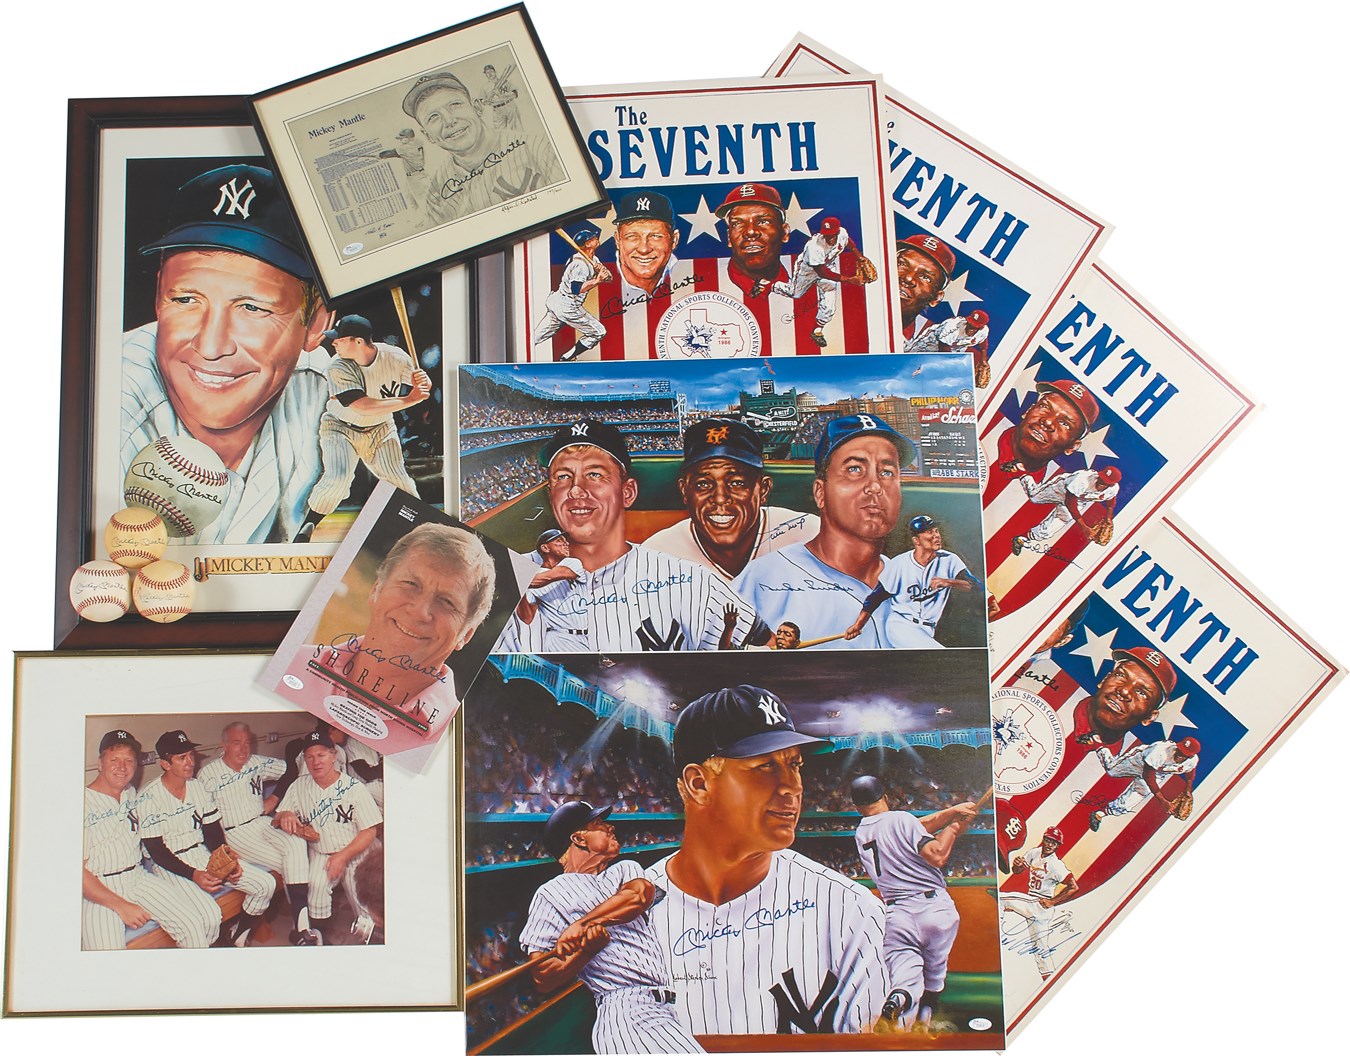 Mantle and Maris - Stunning Mickey Mantle Autograph Collection - JSA (20)